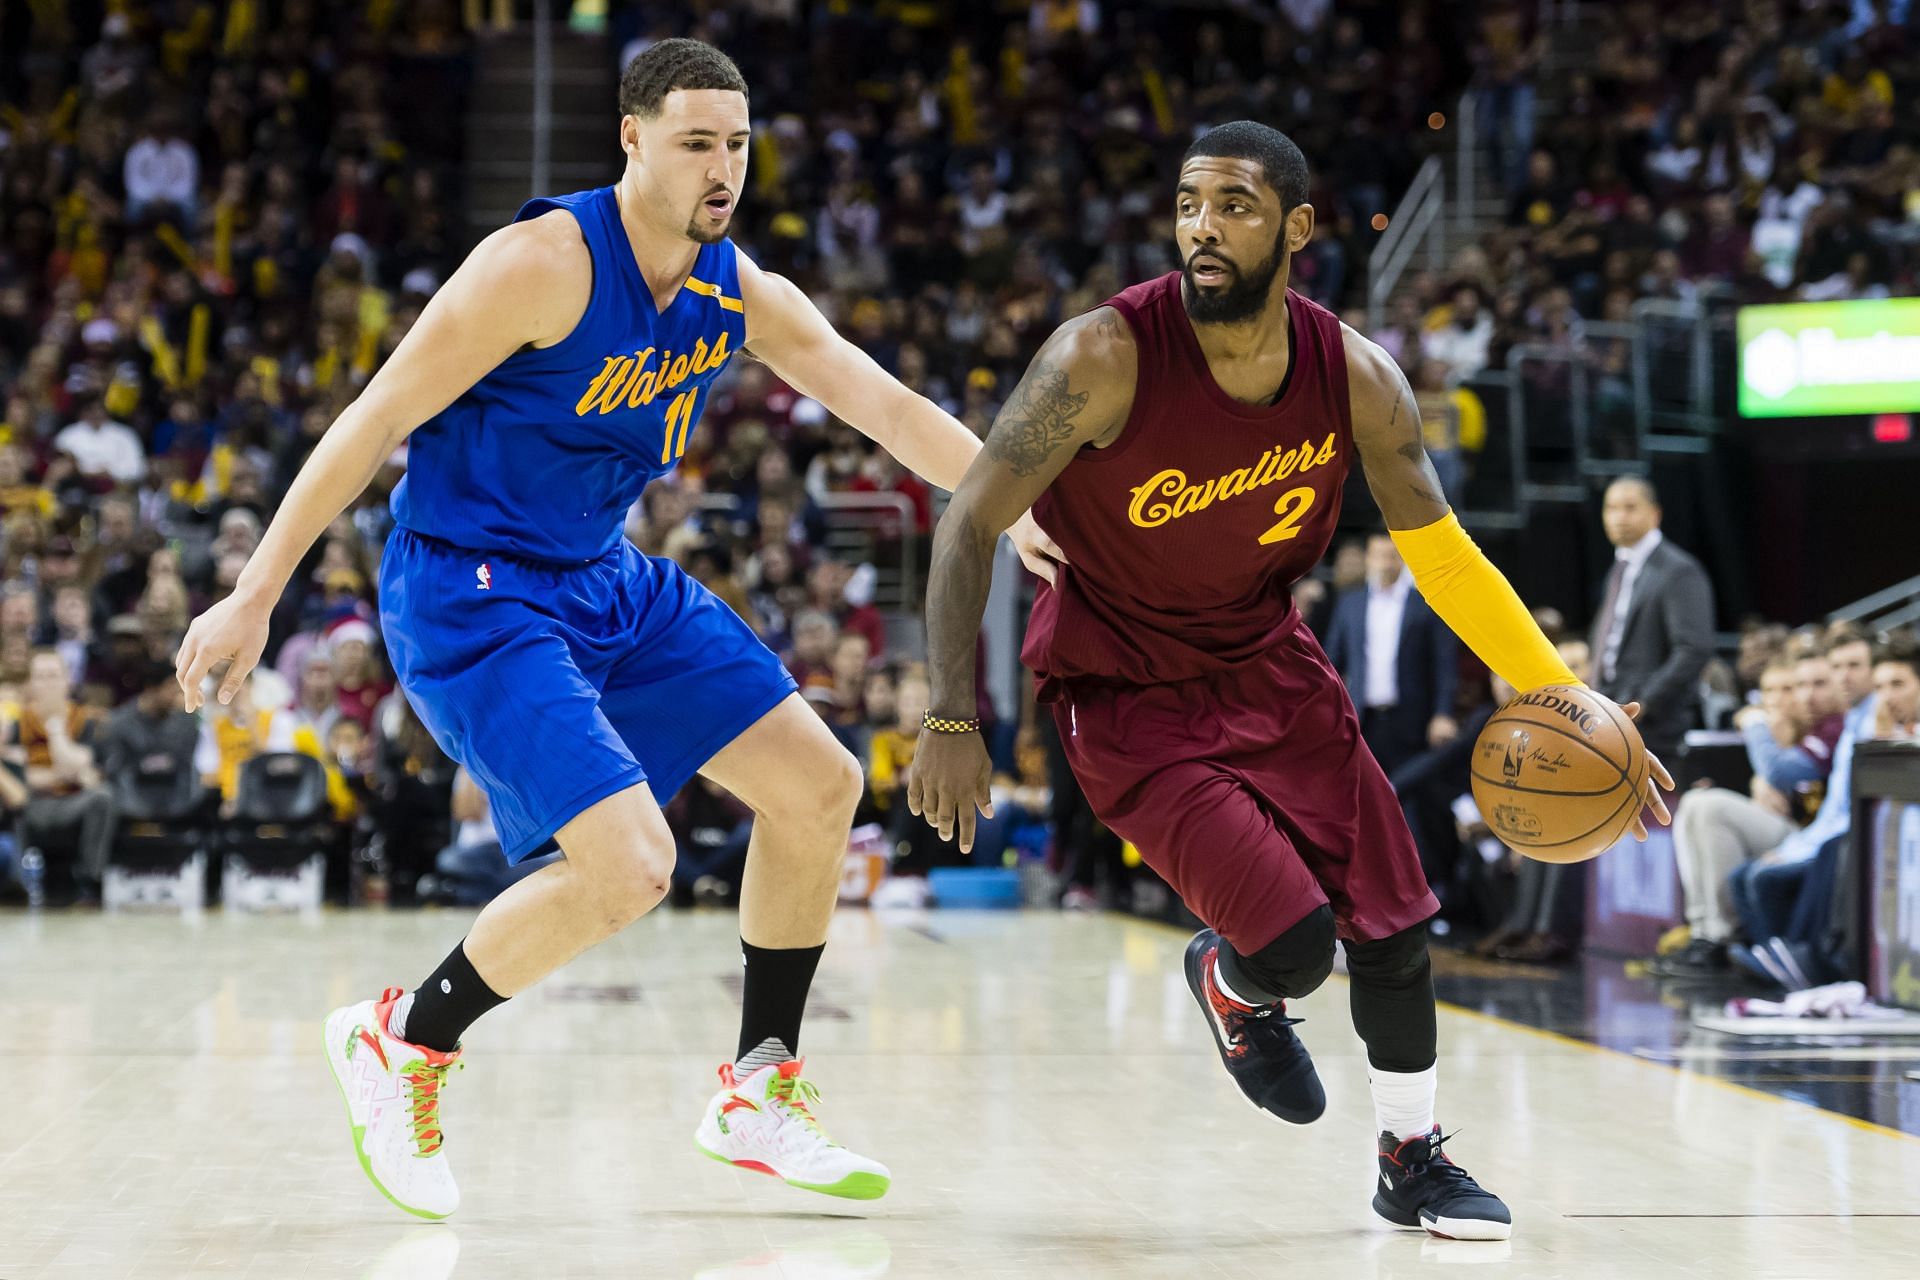 Klay Thompson #11 of the Golden State Warriors puts pressure on Kyrie Irving #2 of the Cleveland Cavaliers